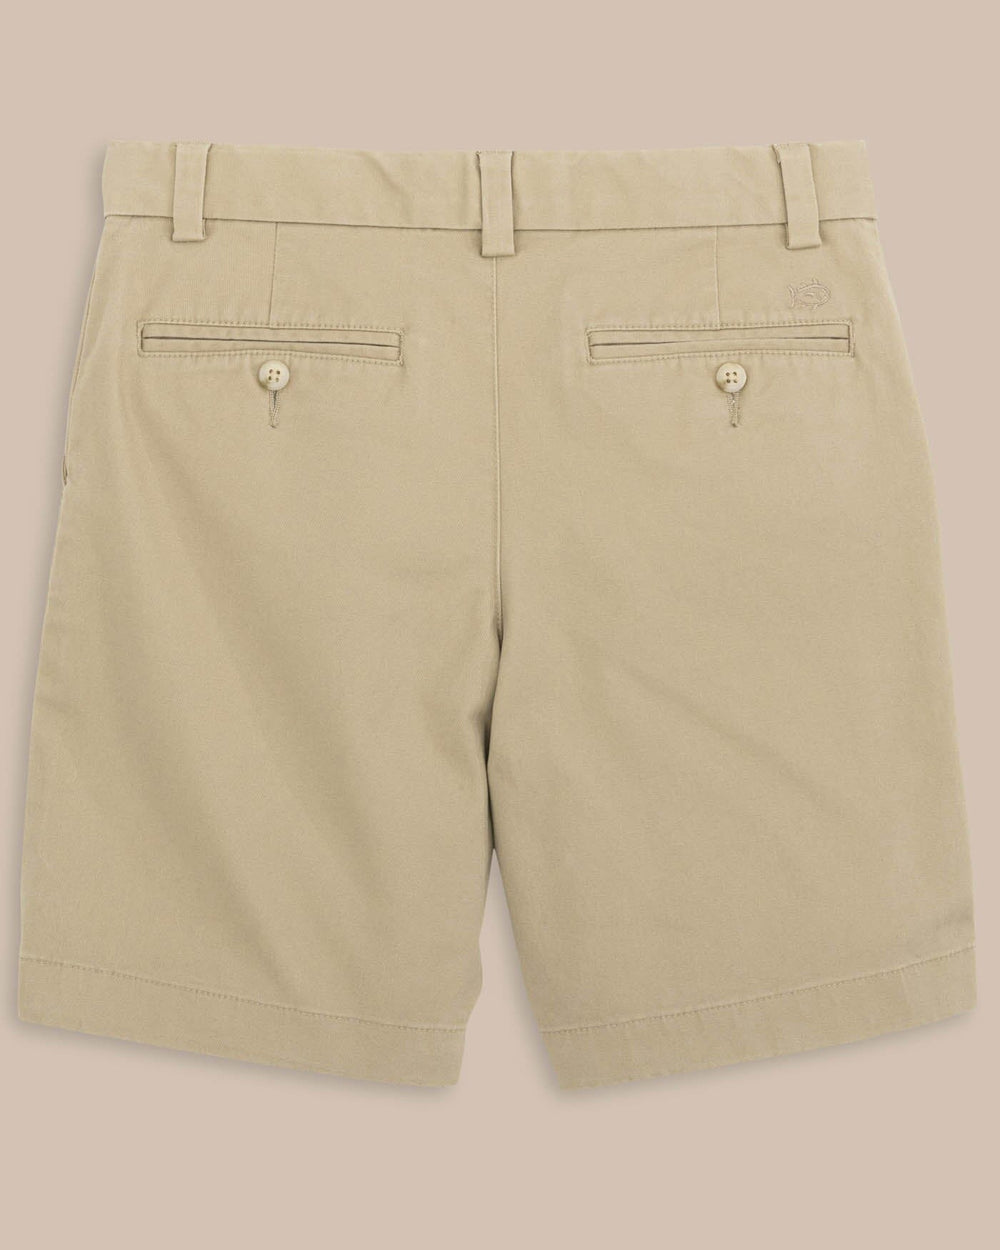 The back view of the Boys Channel Marker Short by Southern Tide - Sandstone Khaki